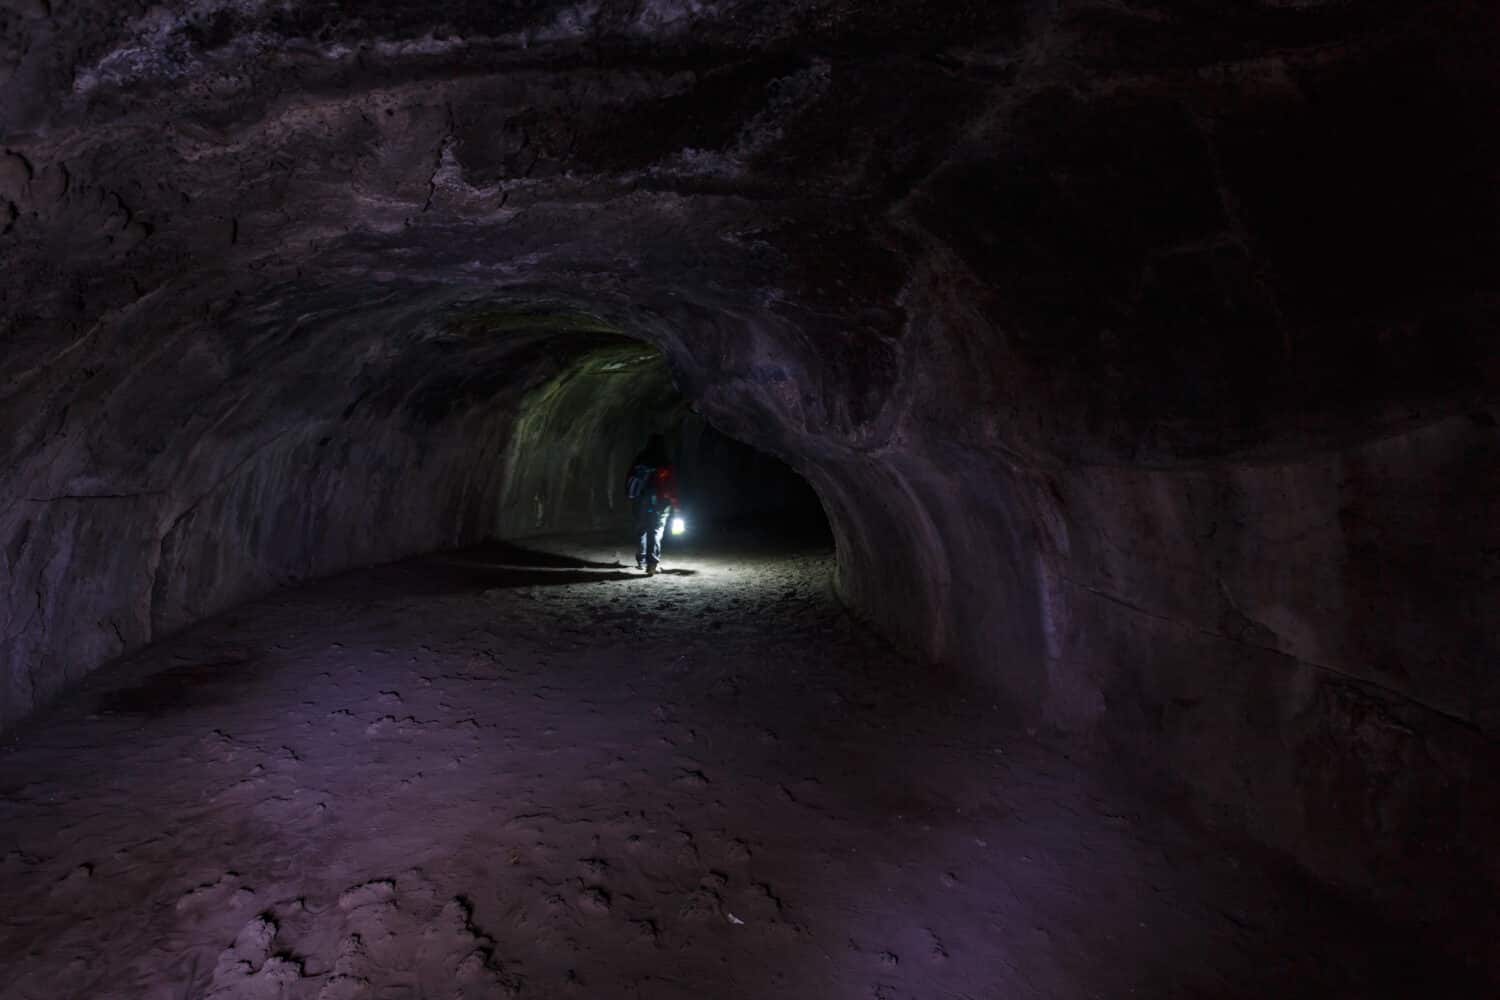 Hiker with lantern walks through Lassen Volcanic National Parks Lava tube a cave made during molten lava flow